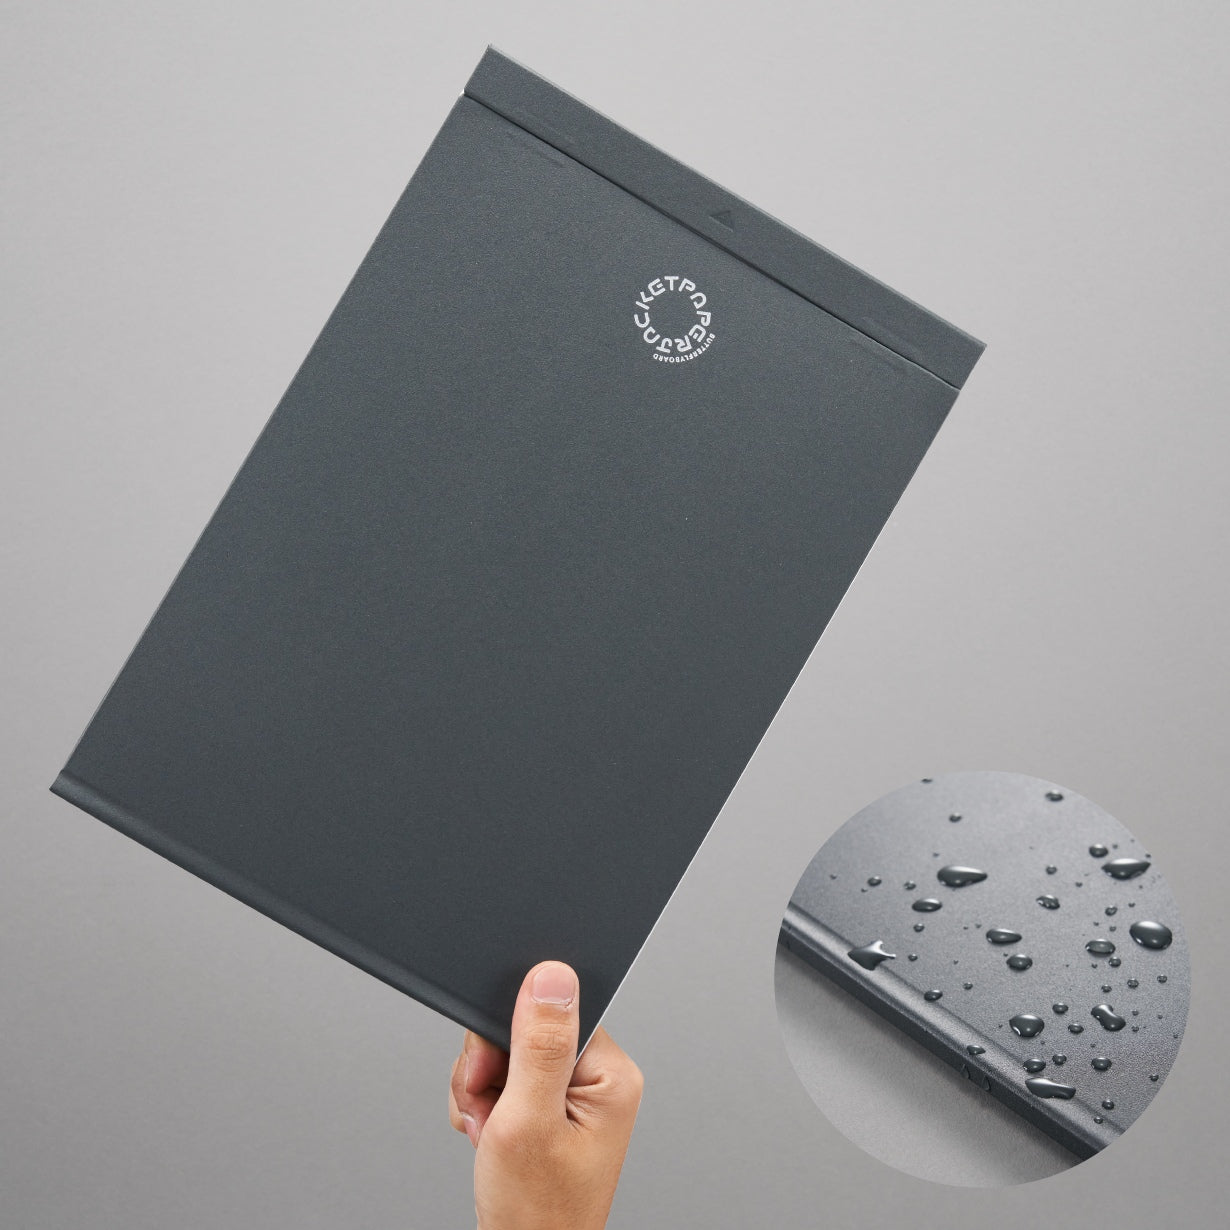 Galvanized System Magnetic Clipboard